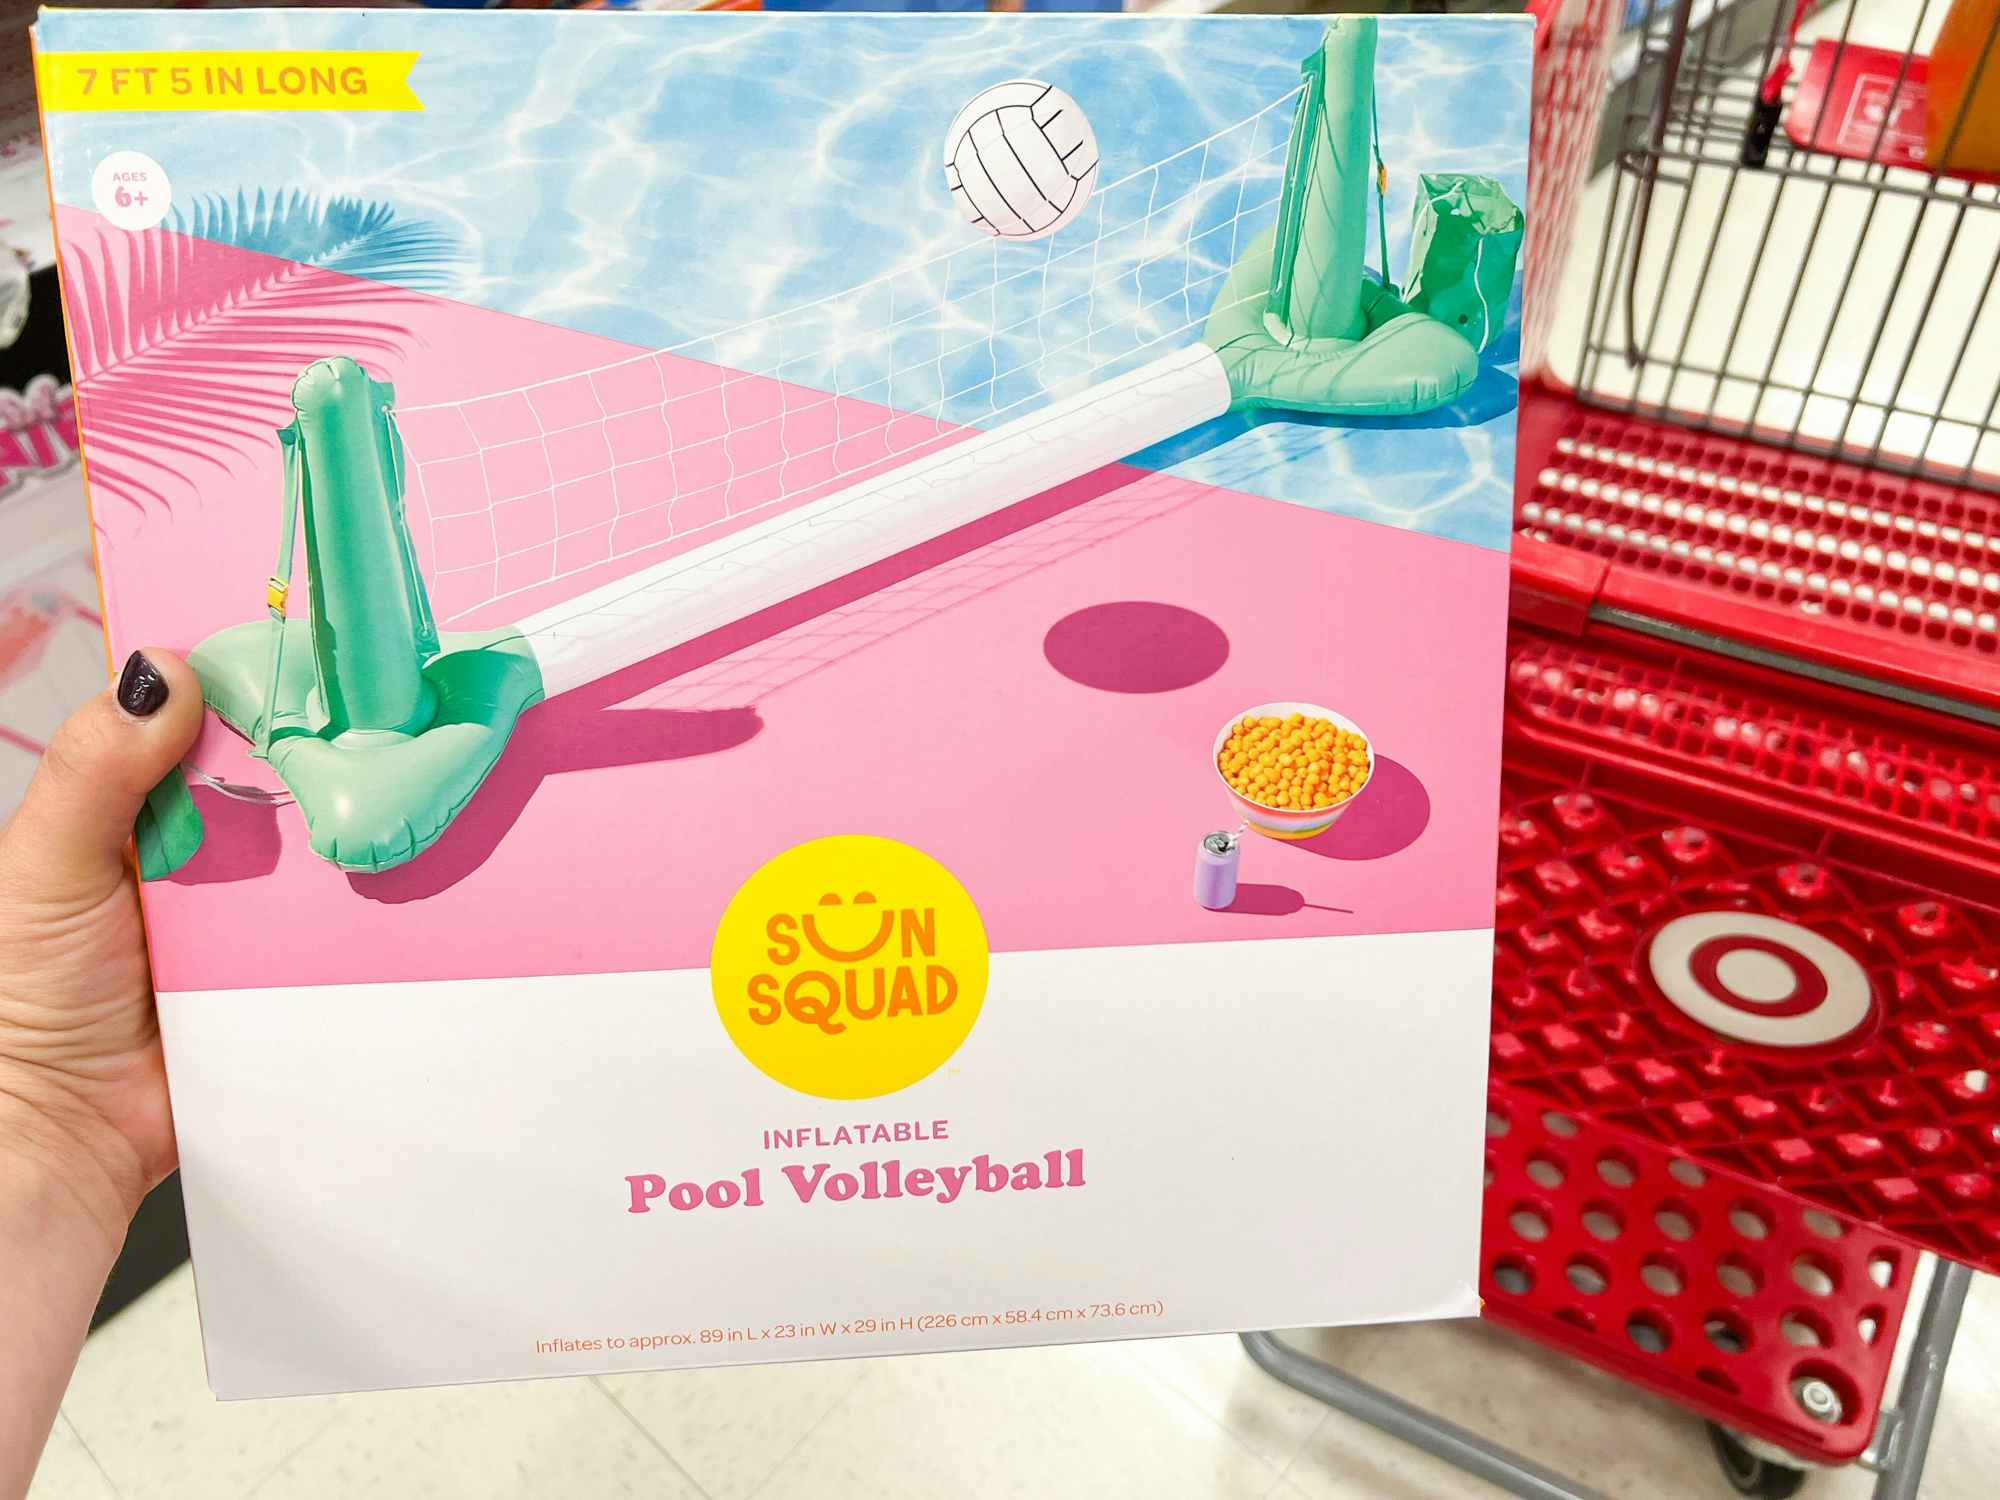 Sun Squad pool volleyball net at Target